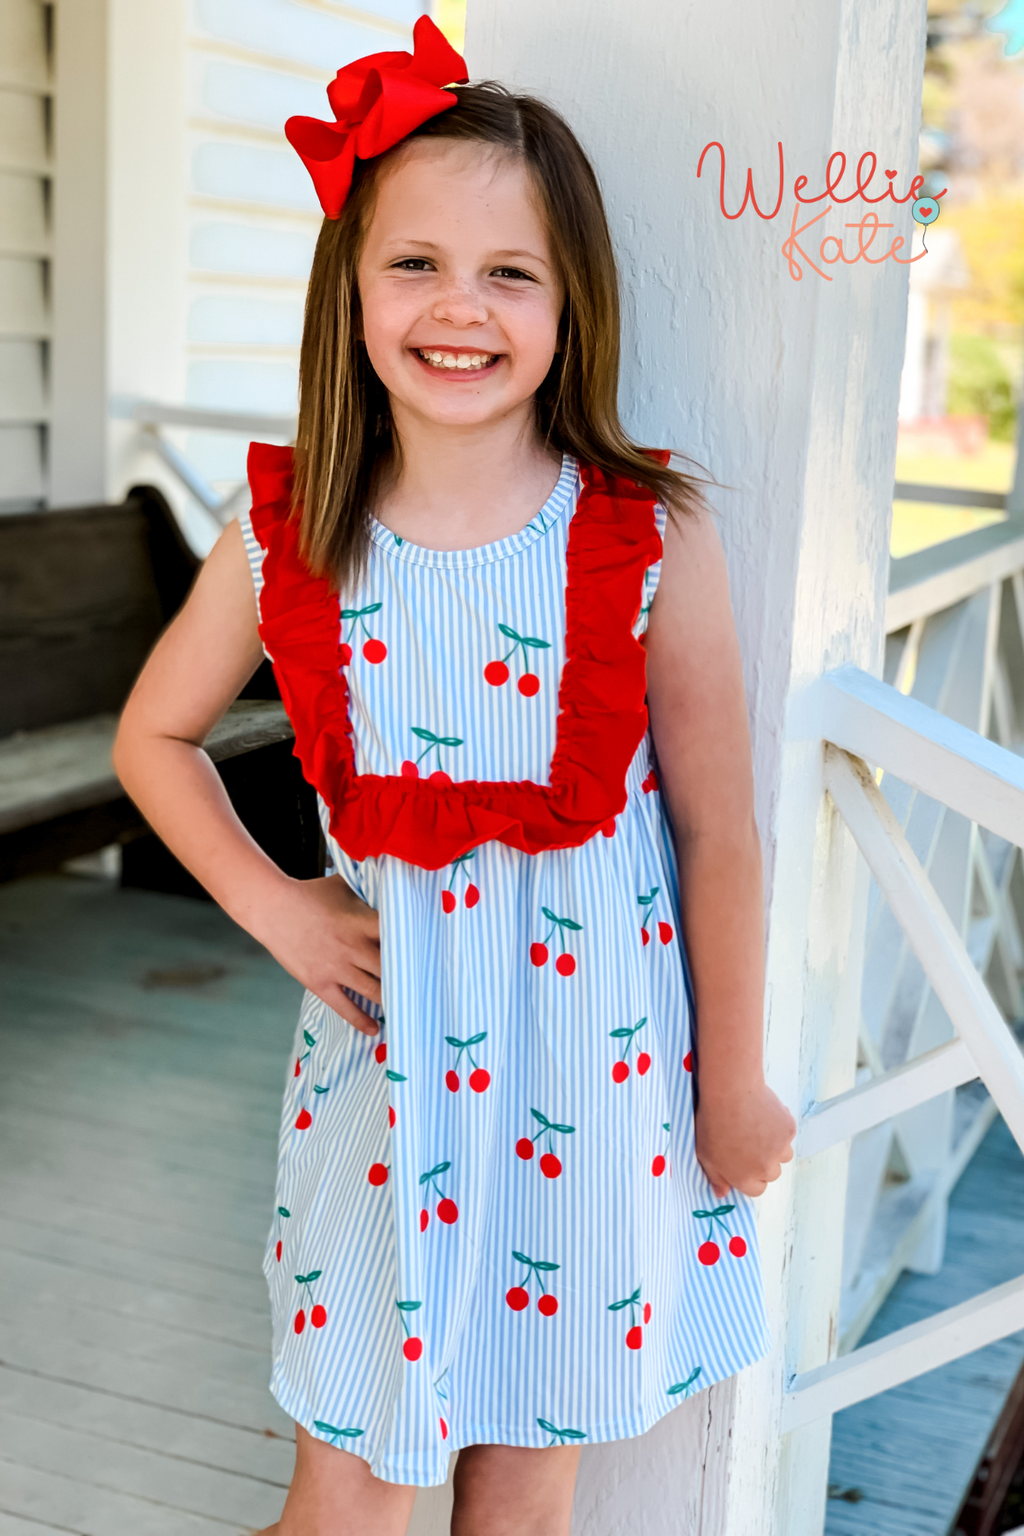 Cherry Dress by Wellie Kate